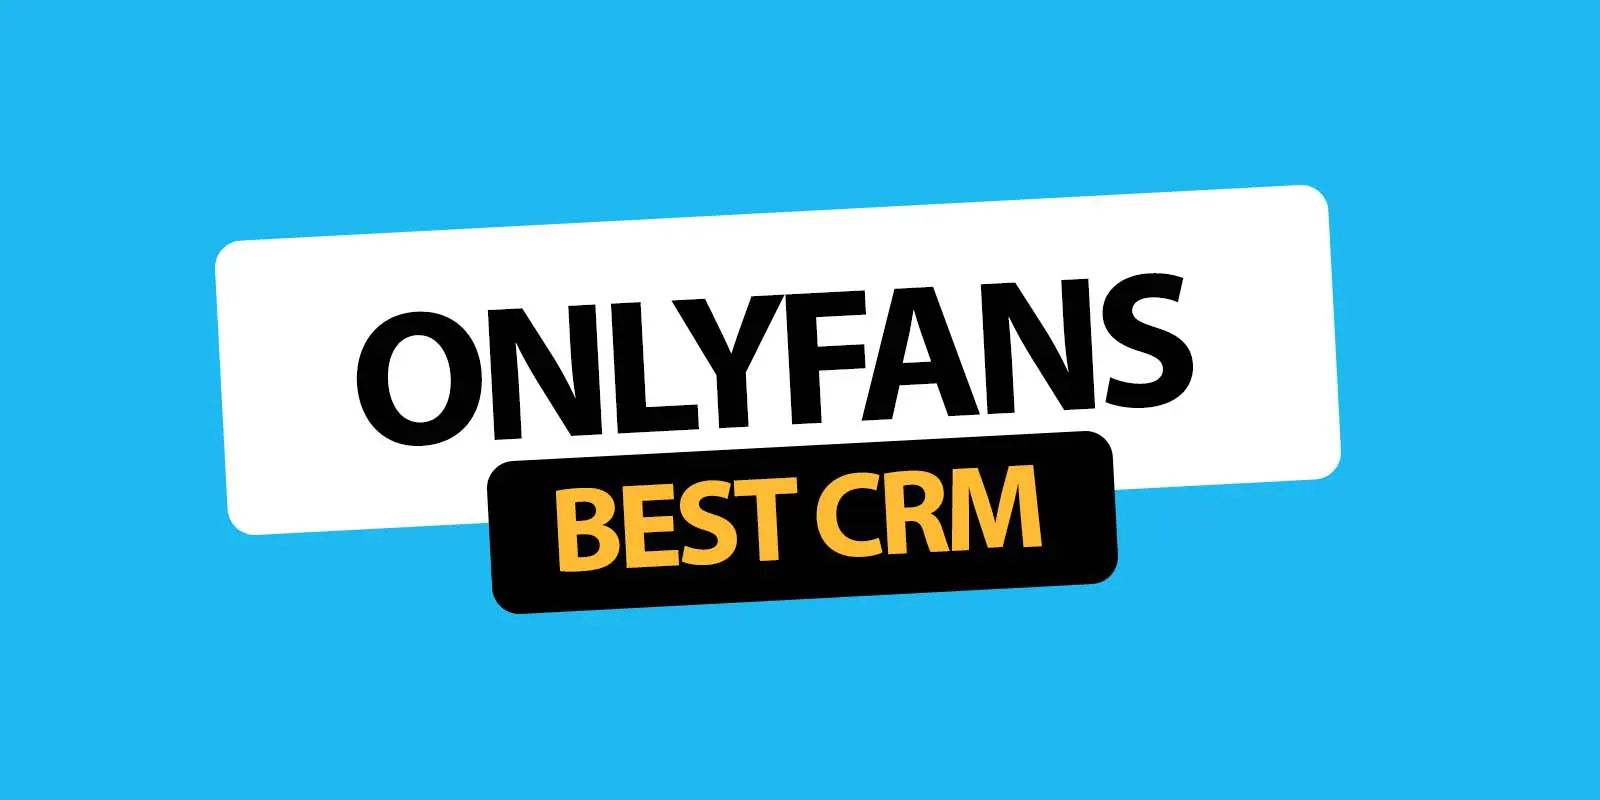 Top CRM Tools That OnlyFans Creators Can't Afford to Ignore!